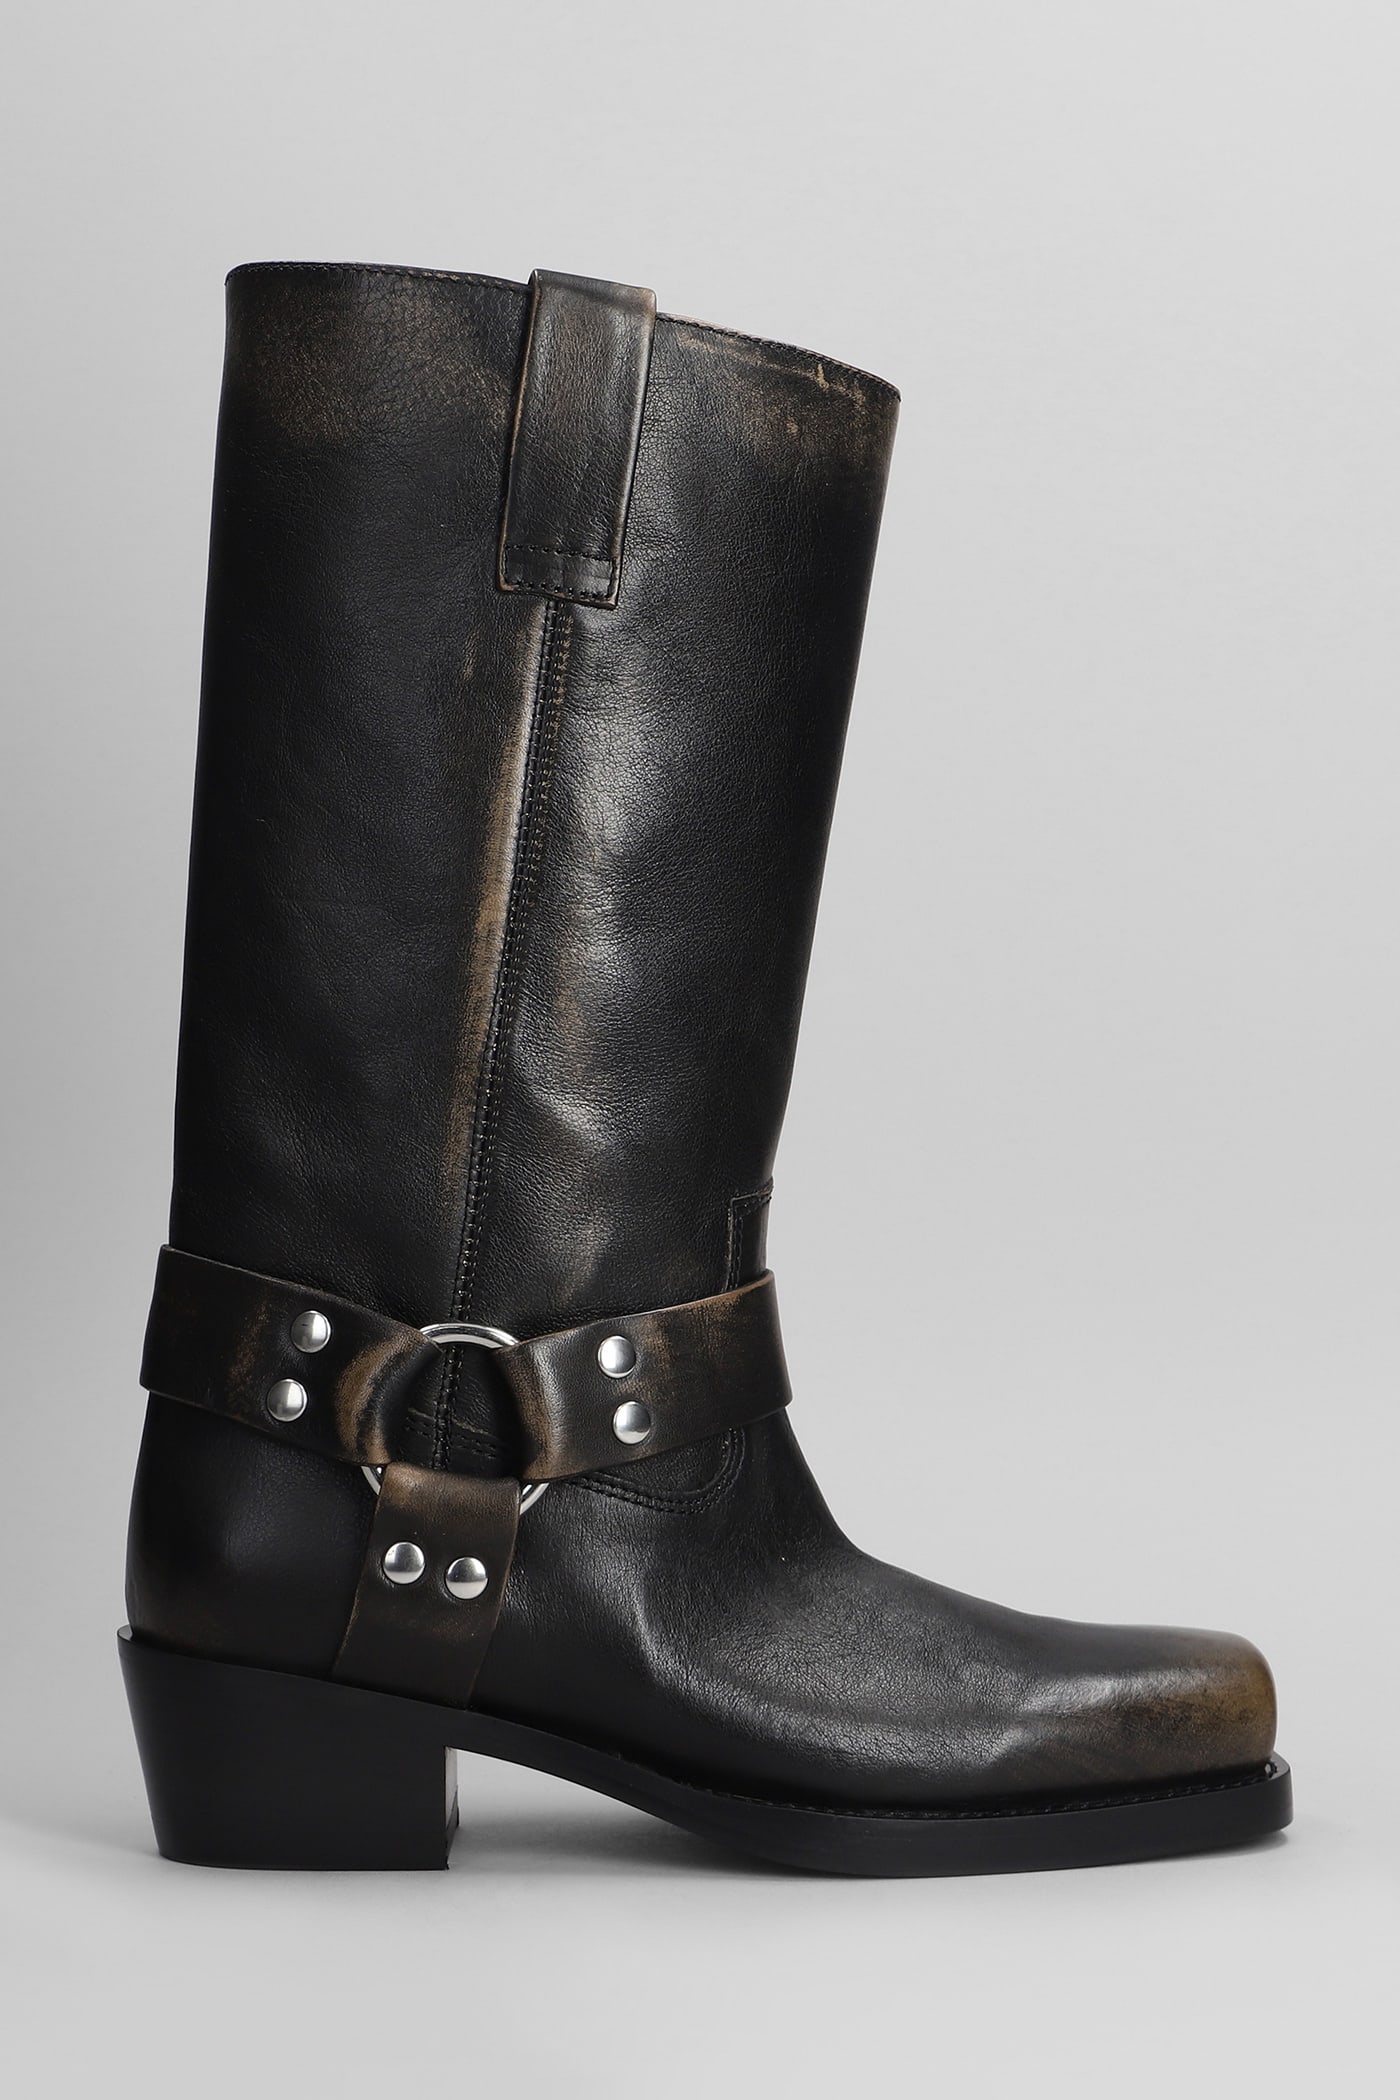 Roxy Boot Texan Ankle Boots In Black Leather